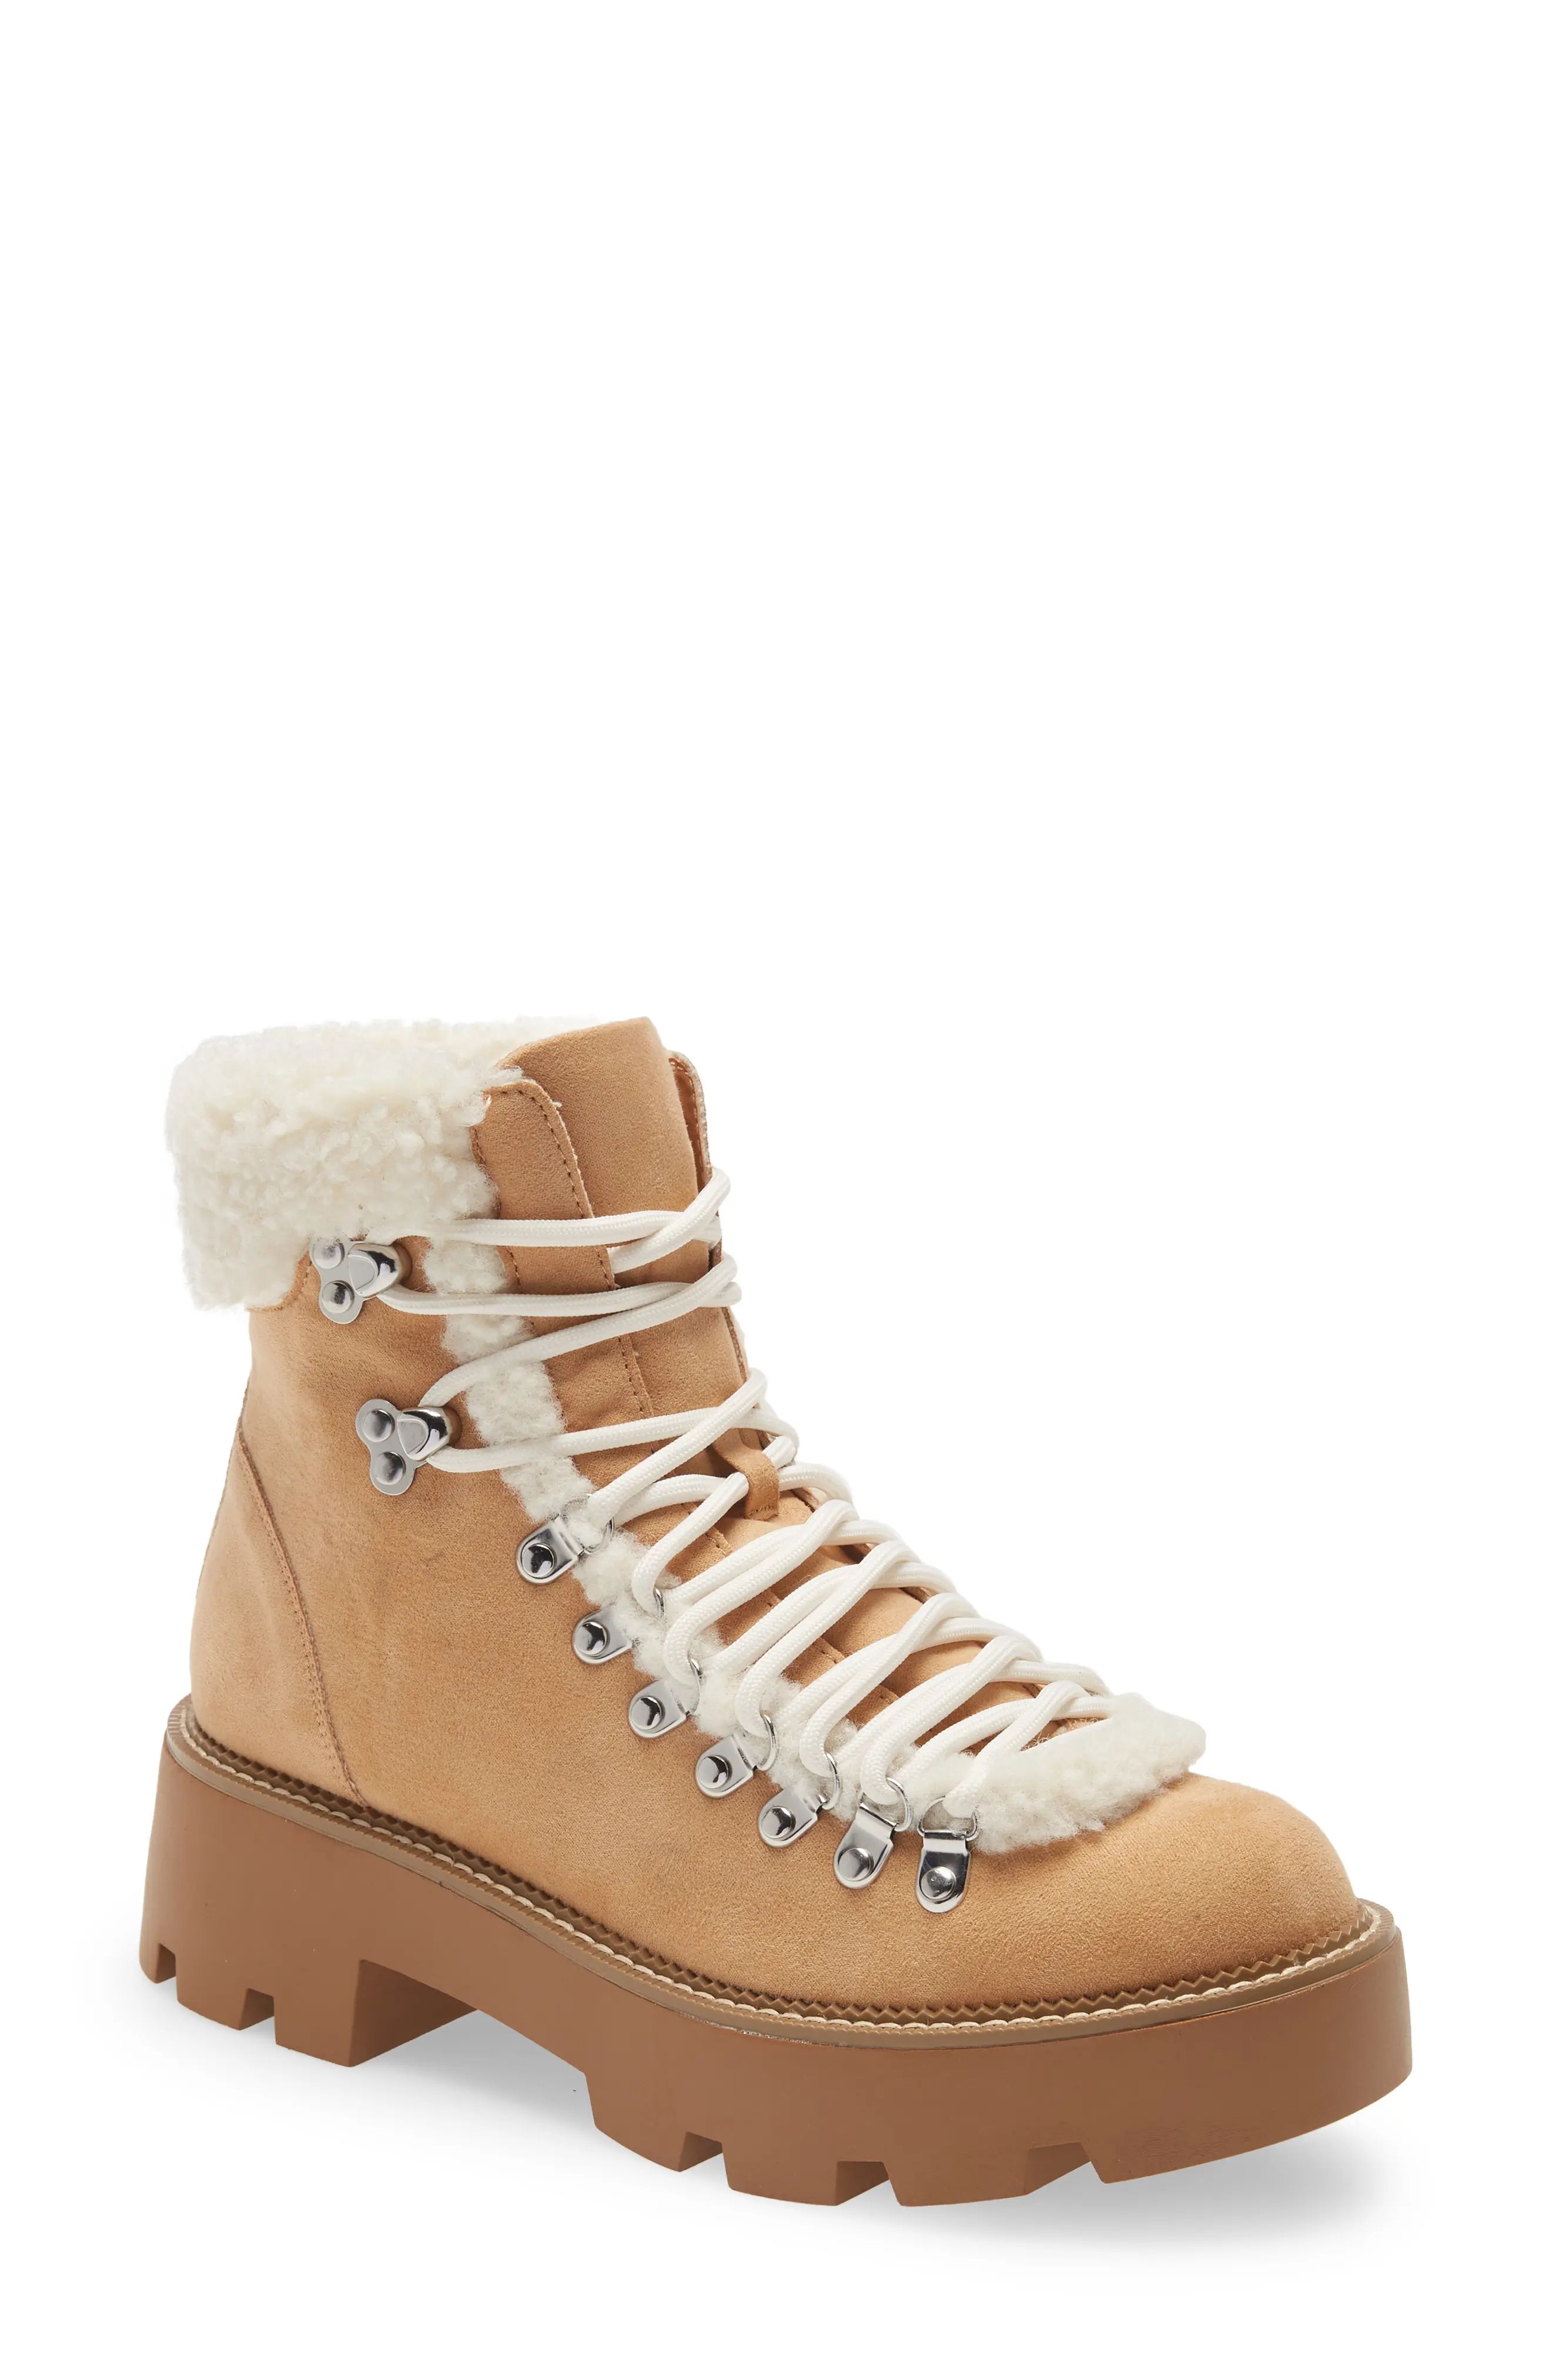 Cool Planet by Steve Madden Cyclone Winter Boot, Size 8.5 in Tan Fab at Nordstrom | Nordstrom